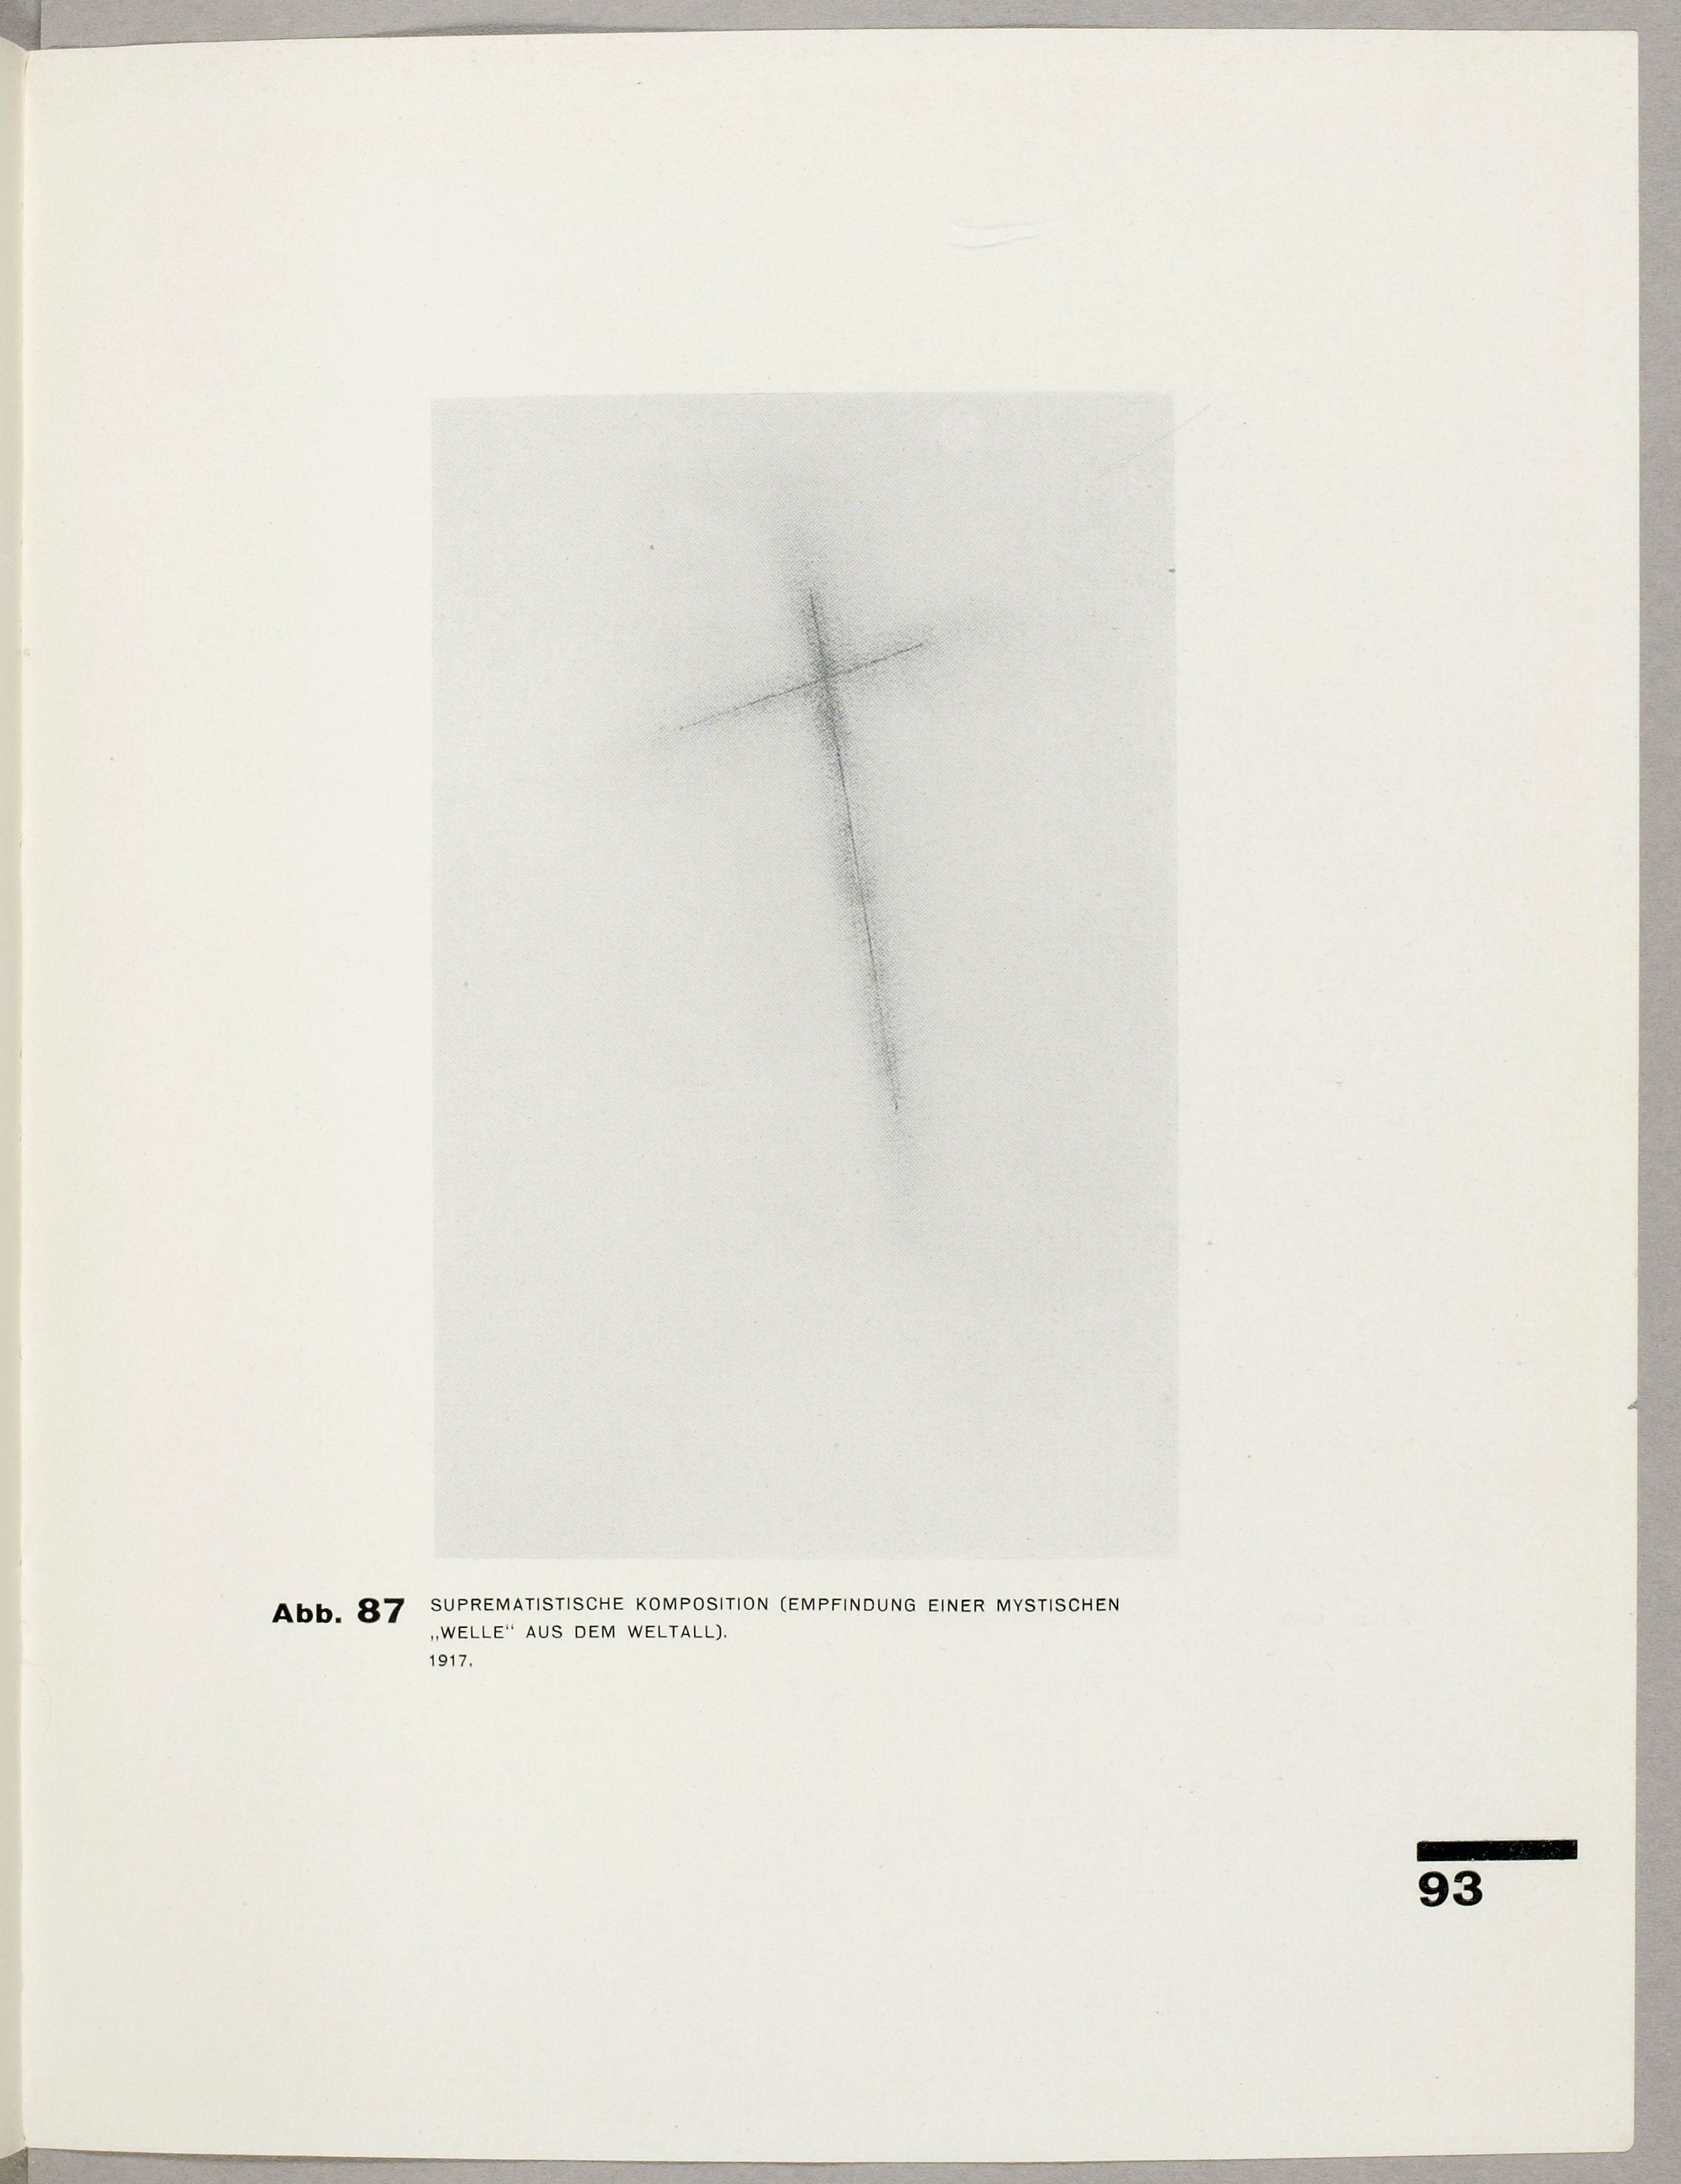 Suprematistic composition (Feeling of a mystic 